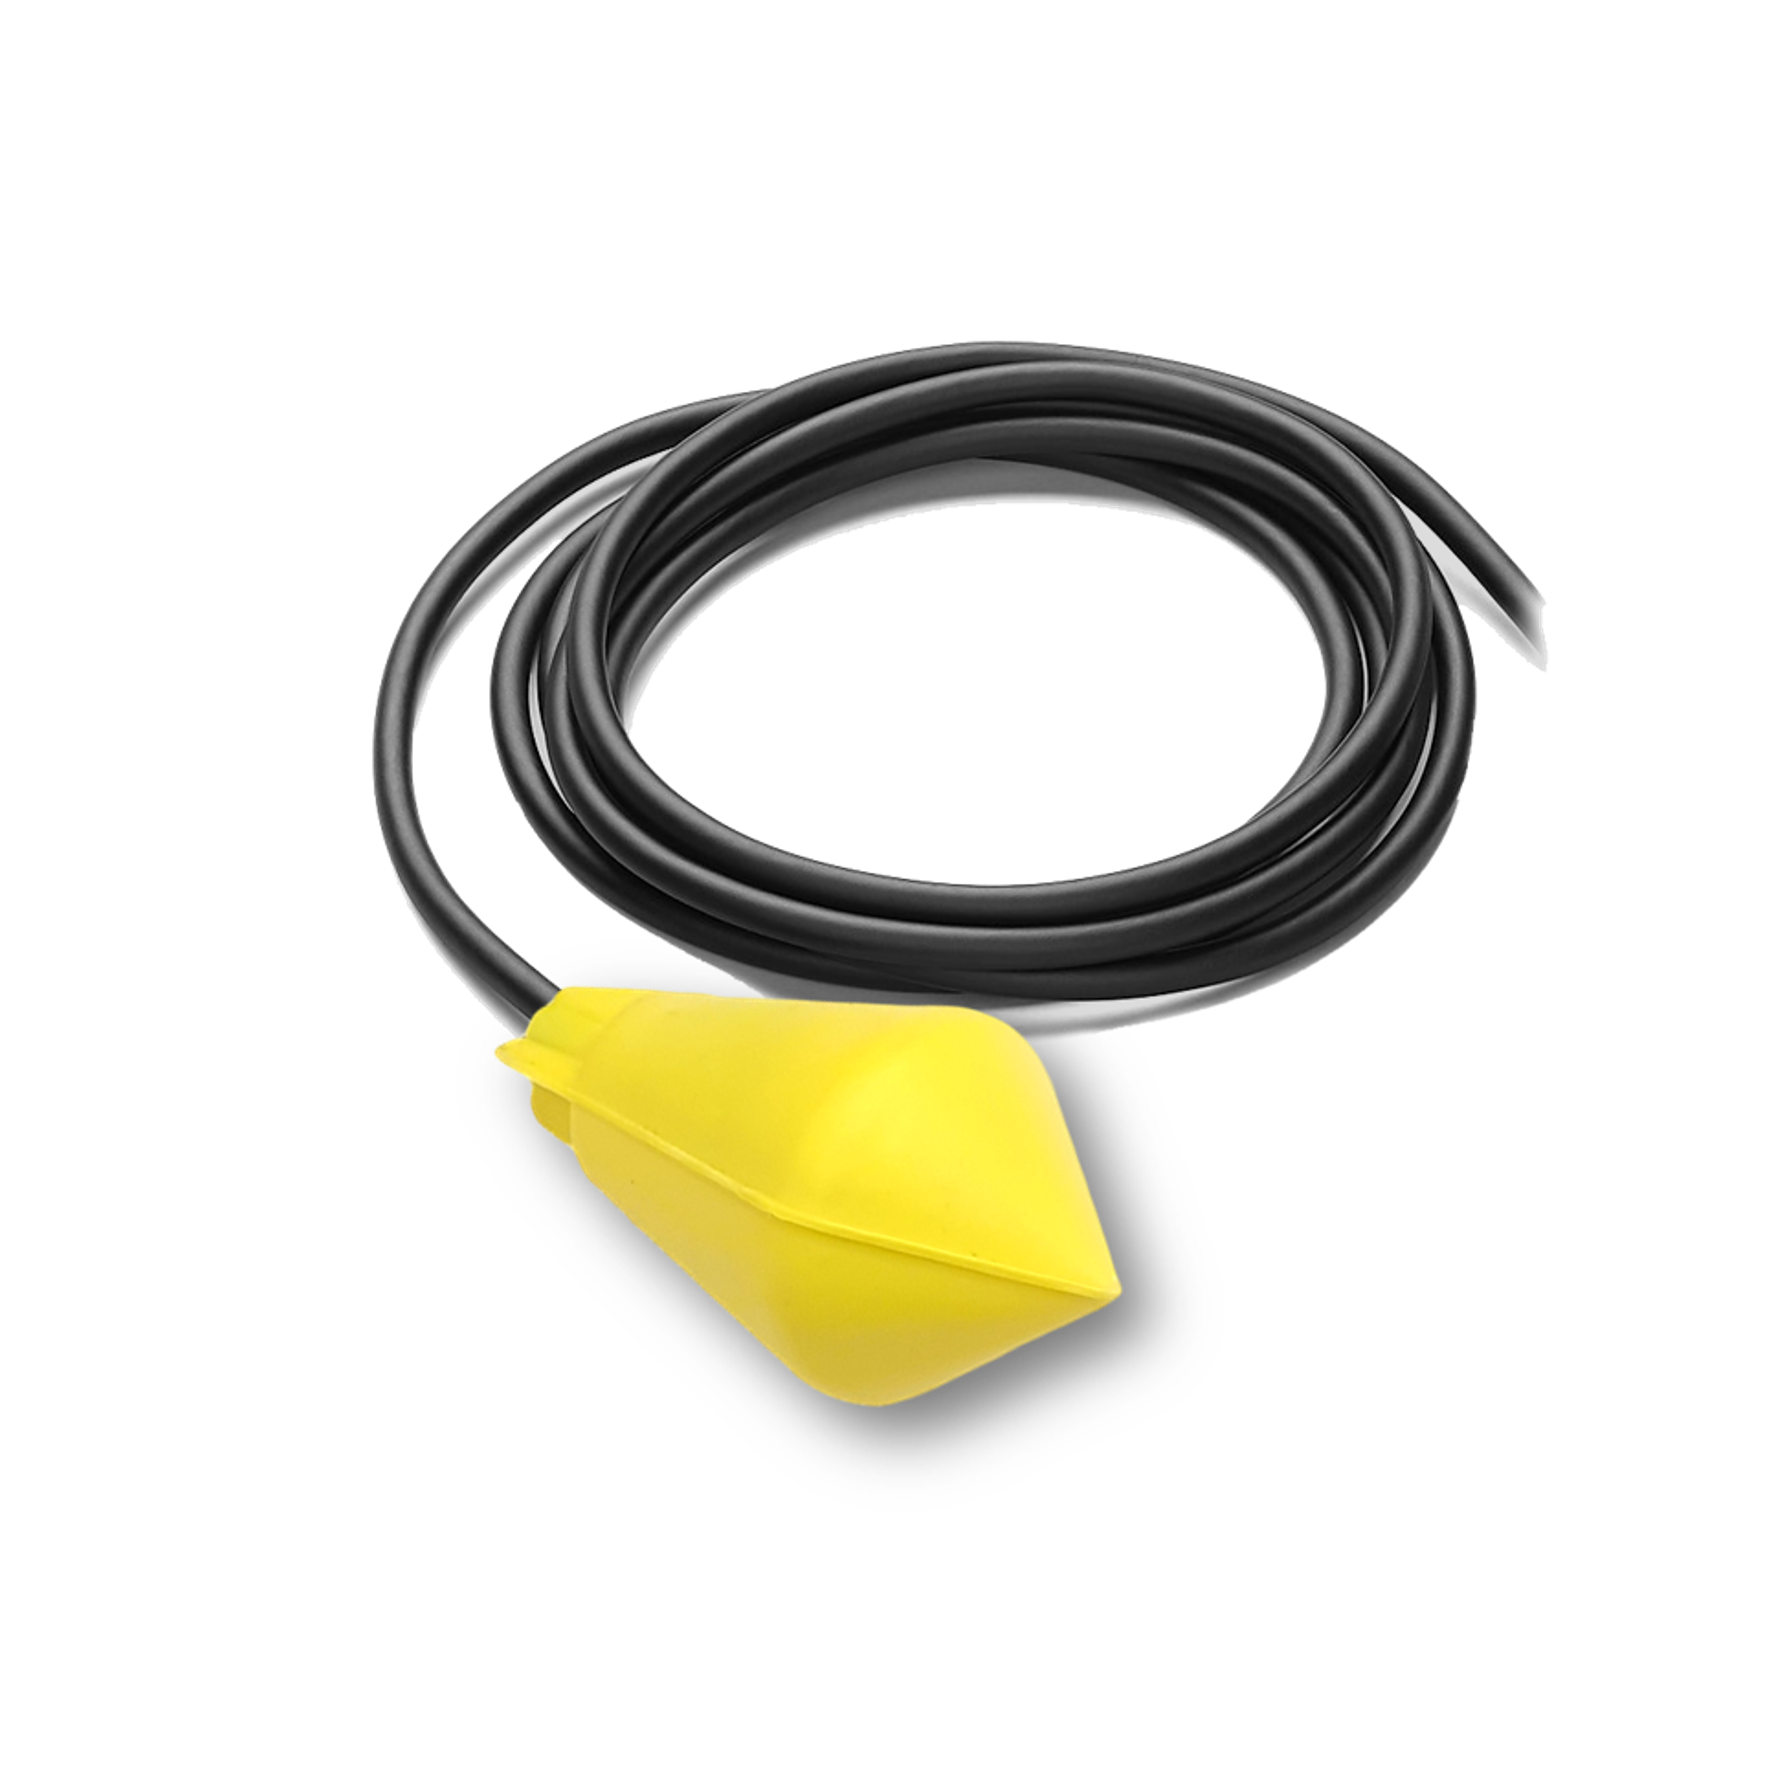 ATMI Cable Mount Copolymer Polypropylene Float Switch, Float, 5m Cable, SPDT, 400V ac Max, 250V dc Max